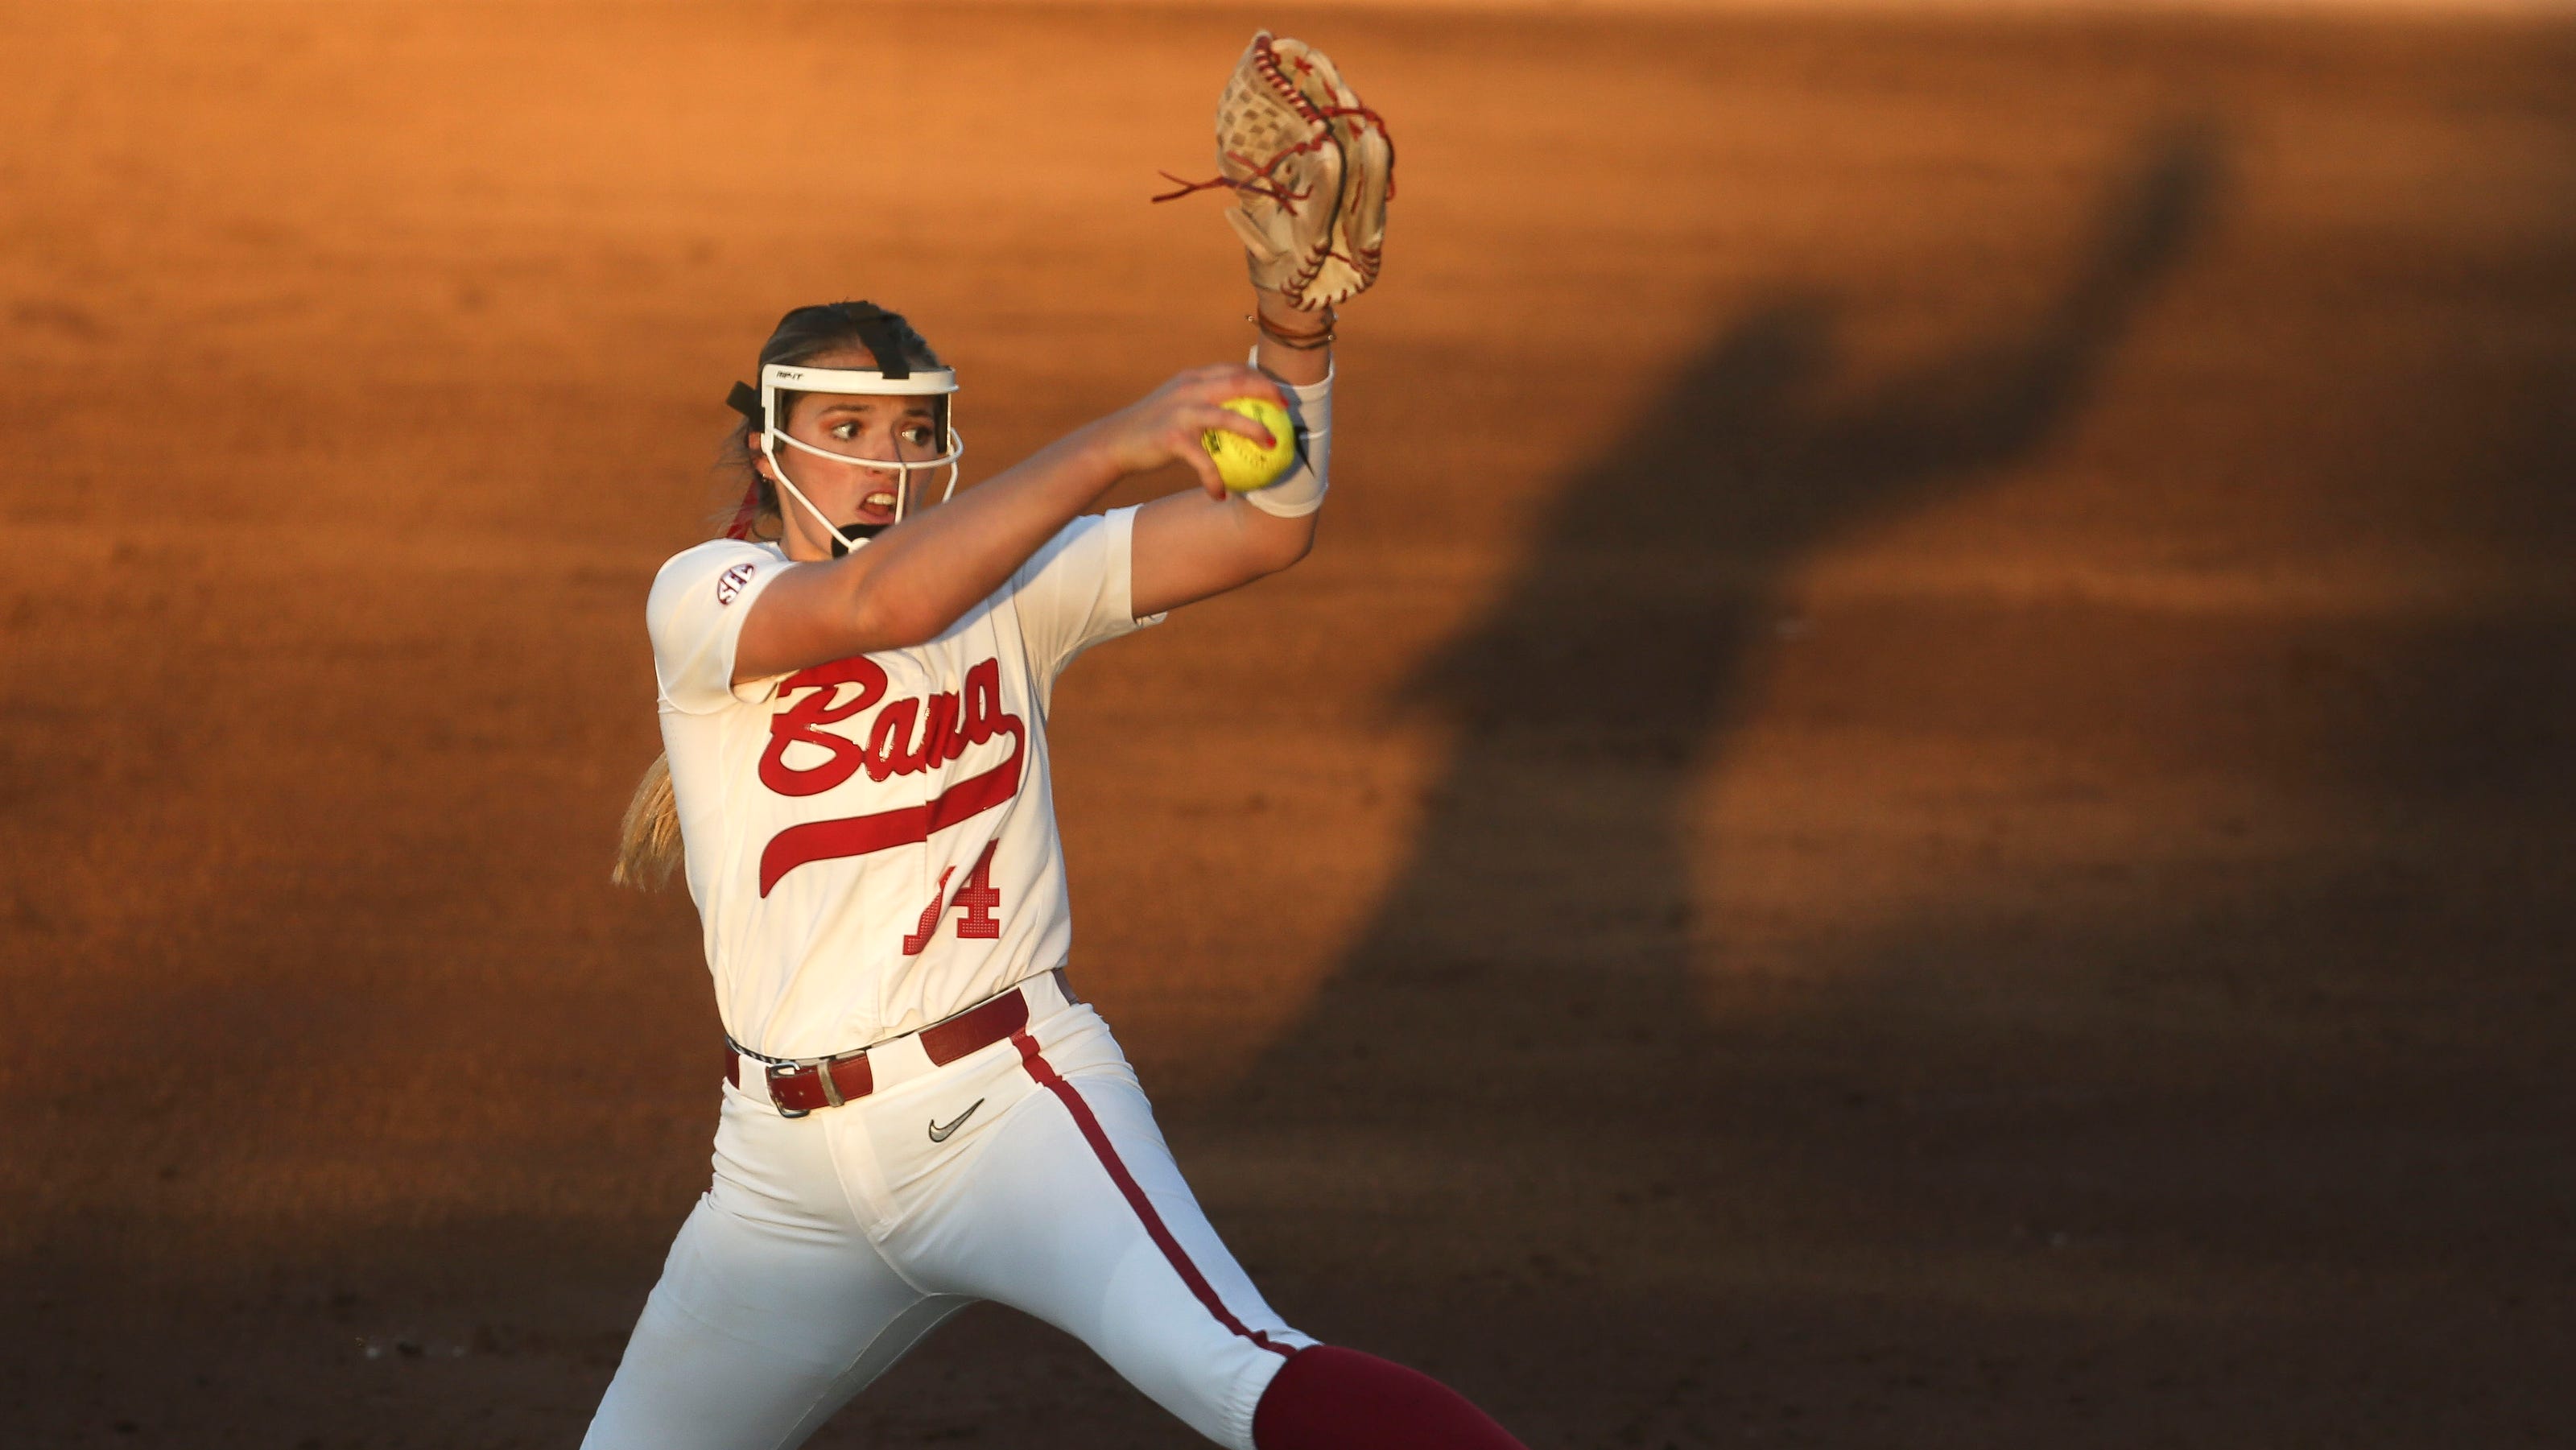 Alabama softball throws another nohitter and remains undefeated